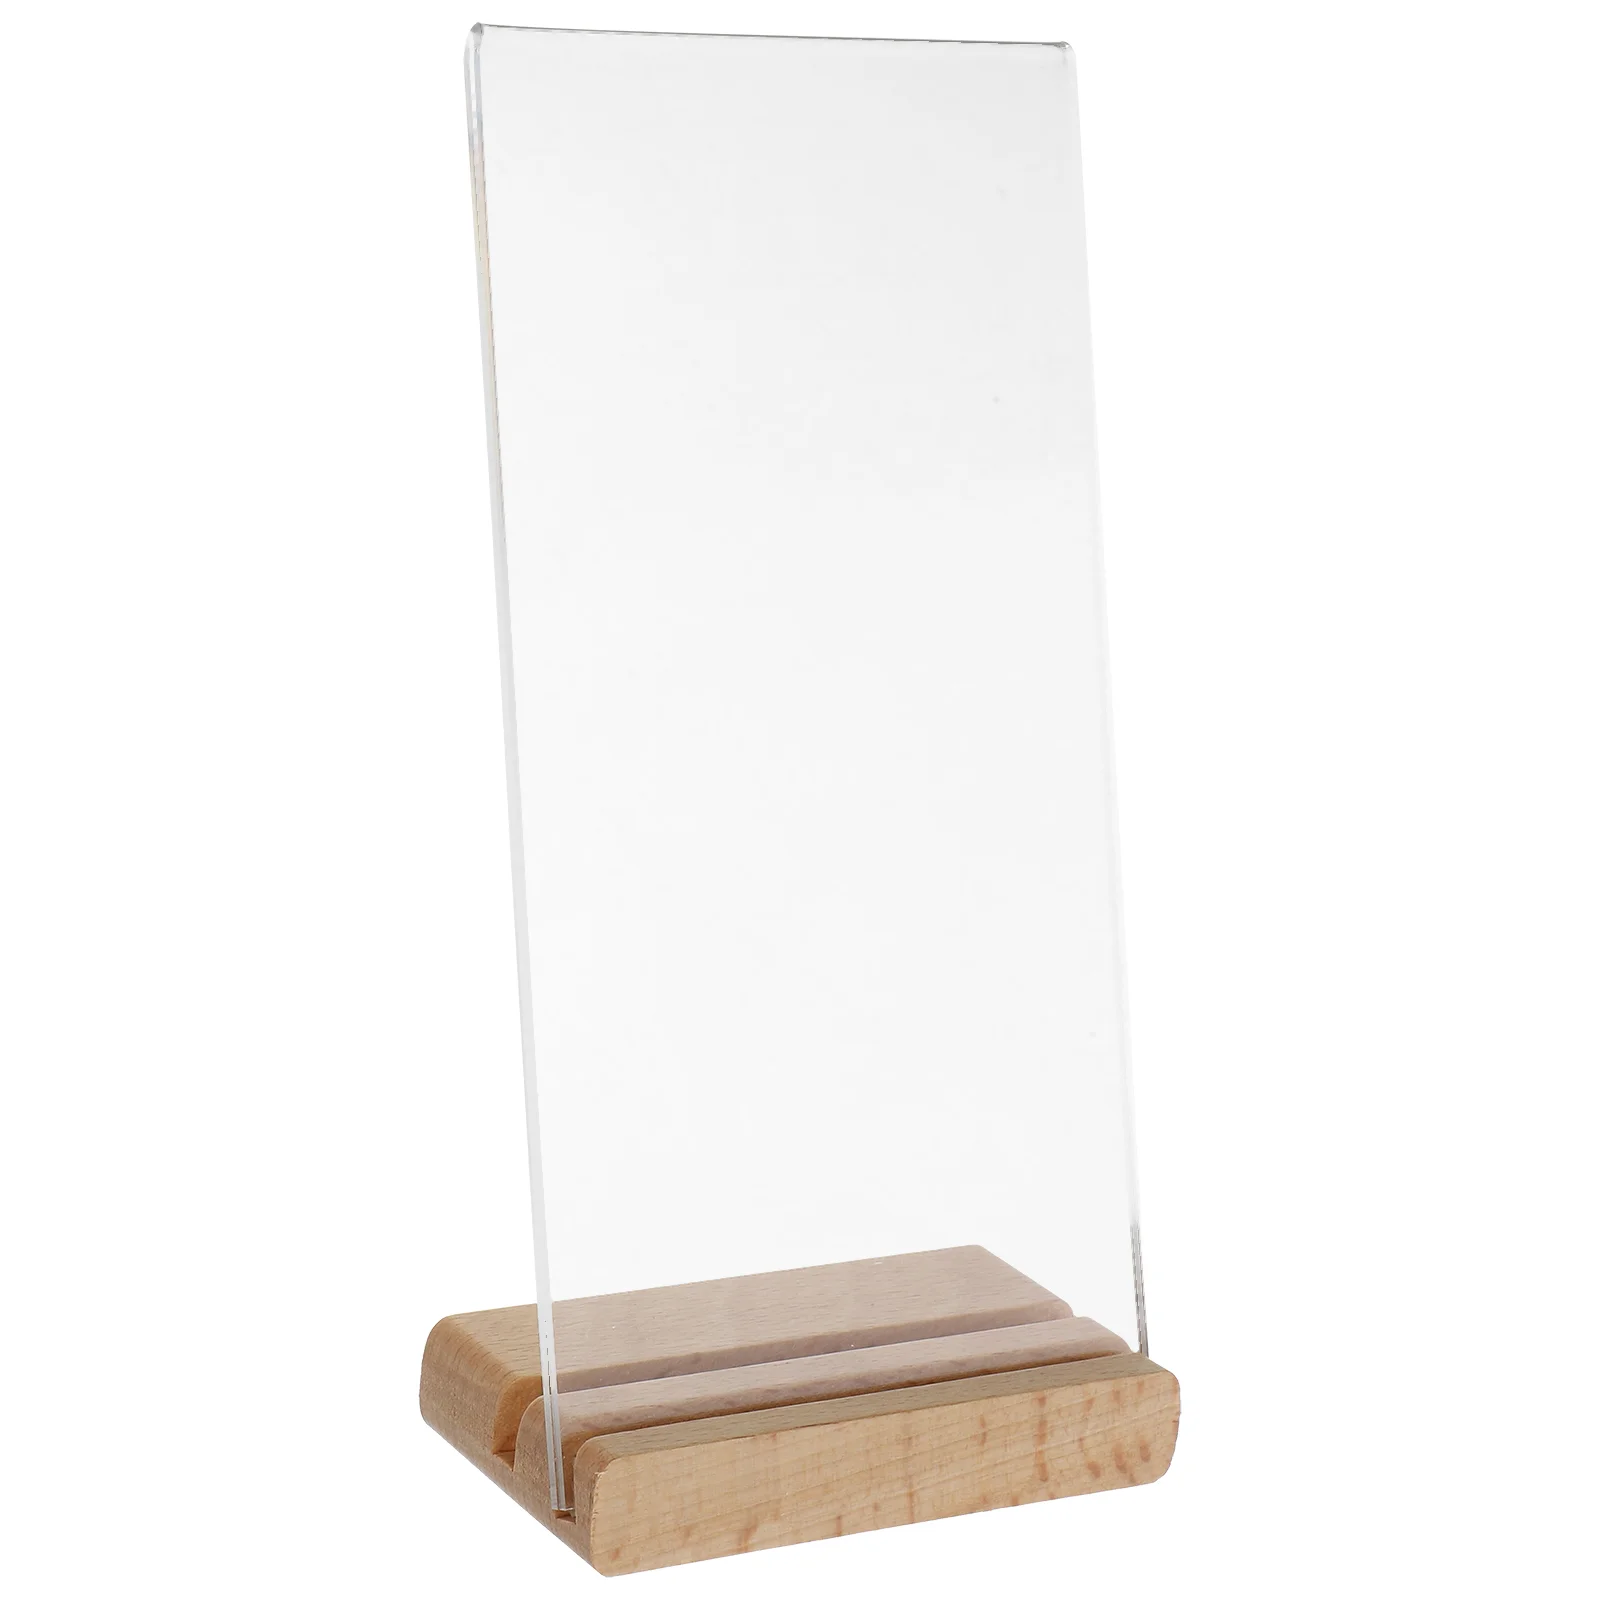 

Acrylic Label Shelves Clear Show Rack Paper Brochure Display Holders Restaurant Table Stand Signs For Wedding